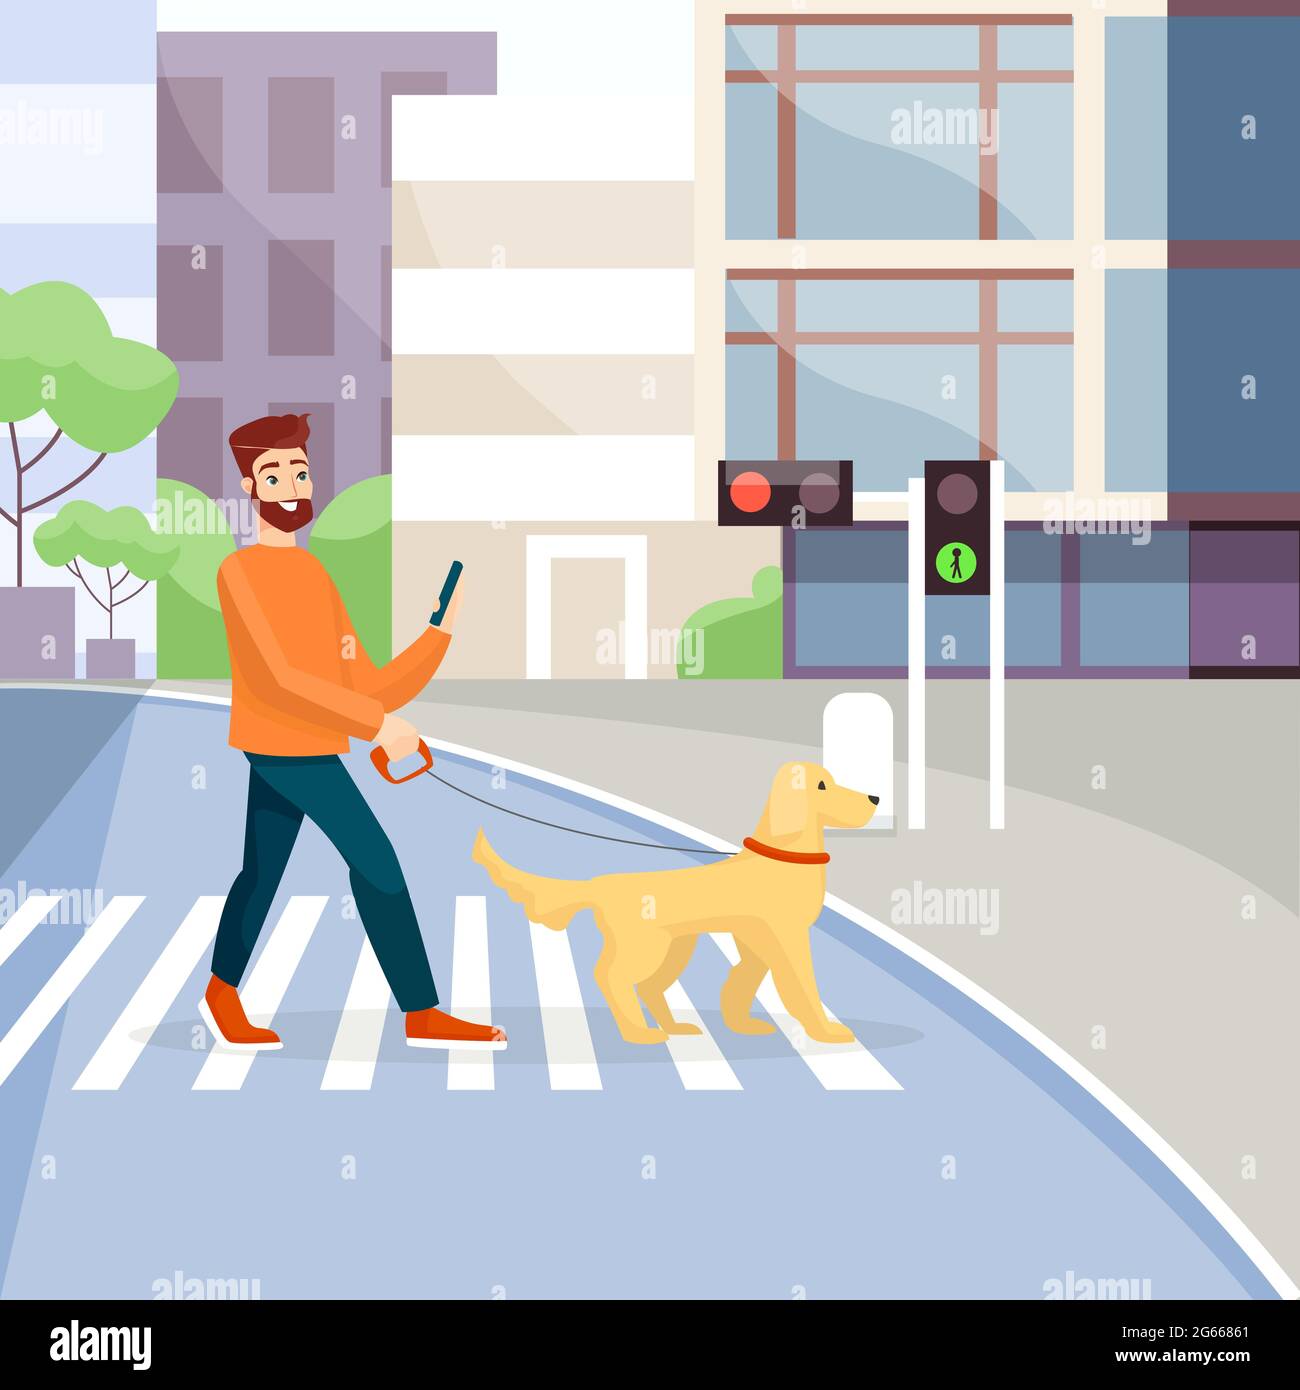 Man crossing street with guide-dog flat vector illustration. Crosswalk, traffic lights green signal. Blind people assistance concept. Guy with pet on Stock Vector